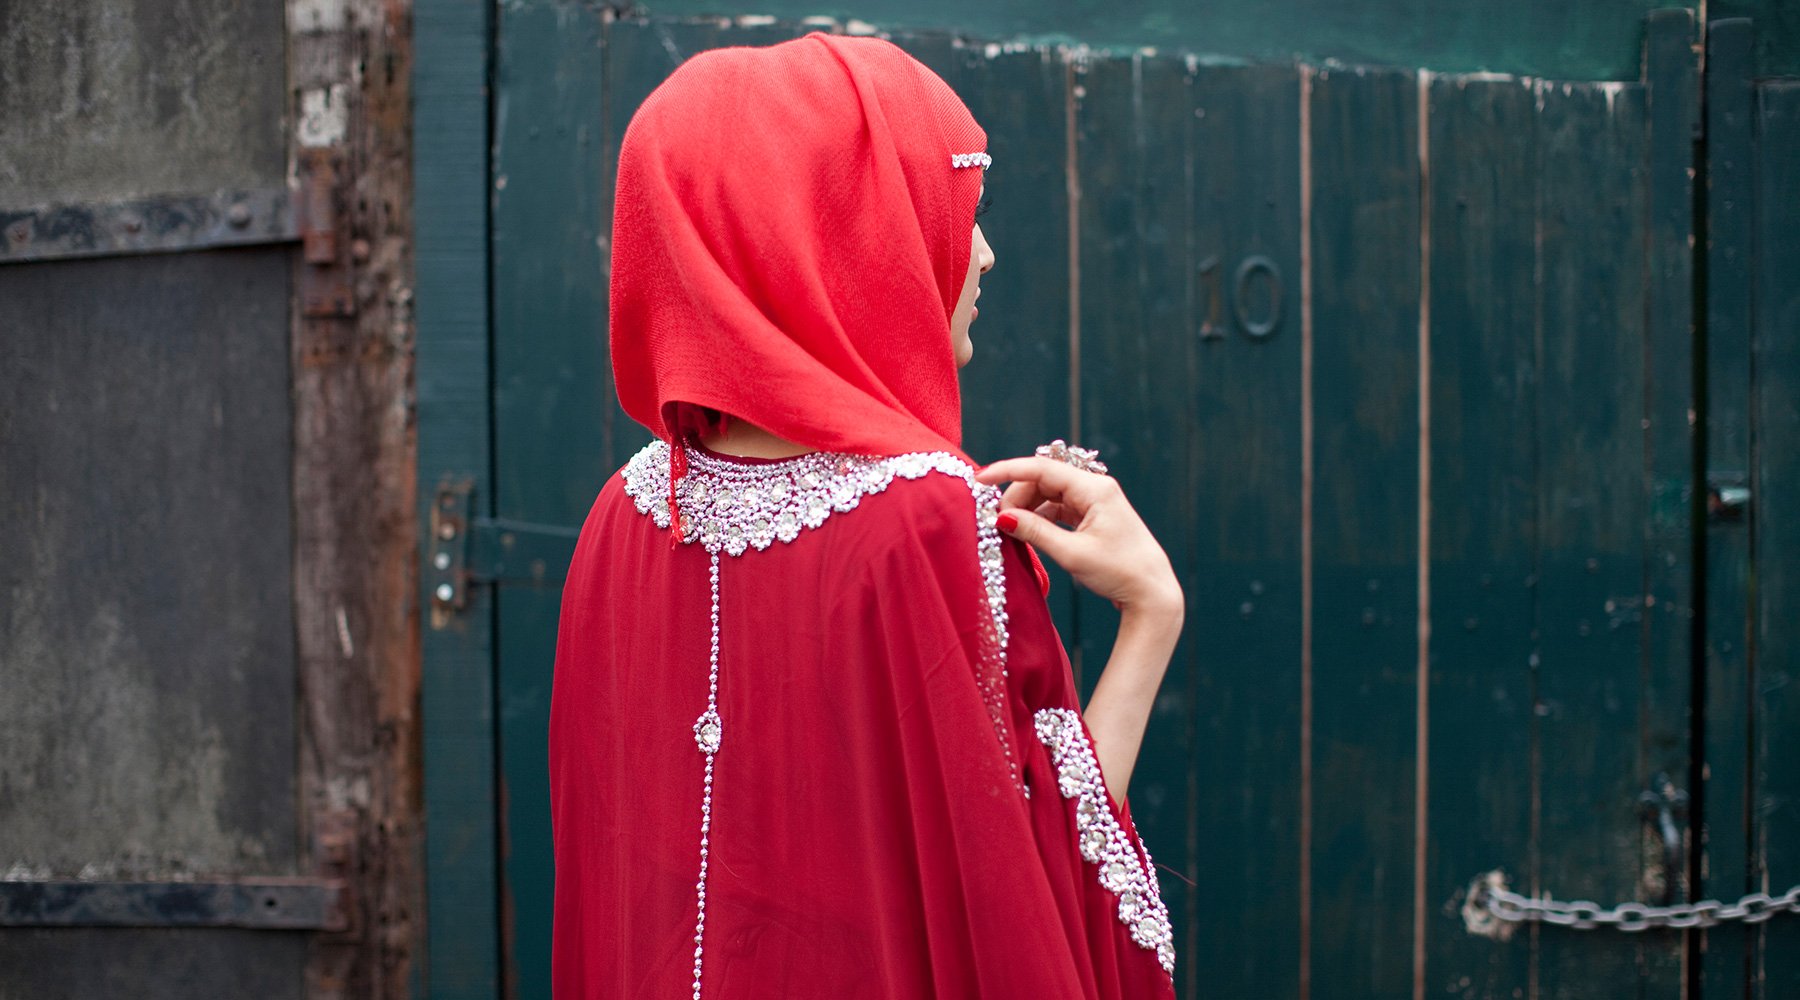  Mahtab Hussain, Red hijab, red dress and bling, from the series Honest With You, 2013 